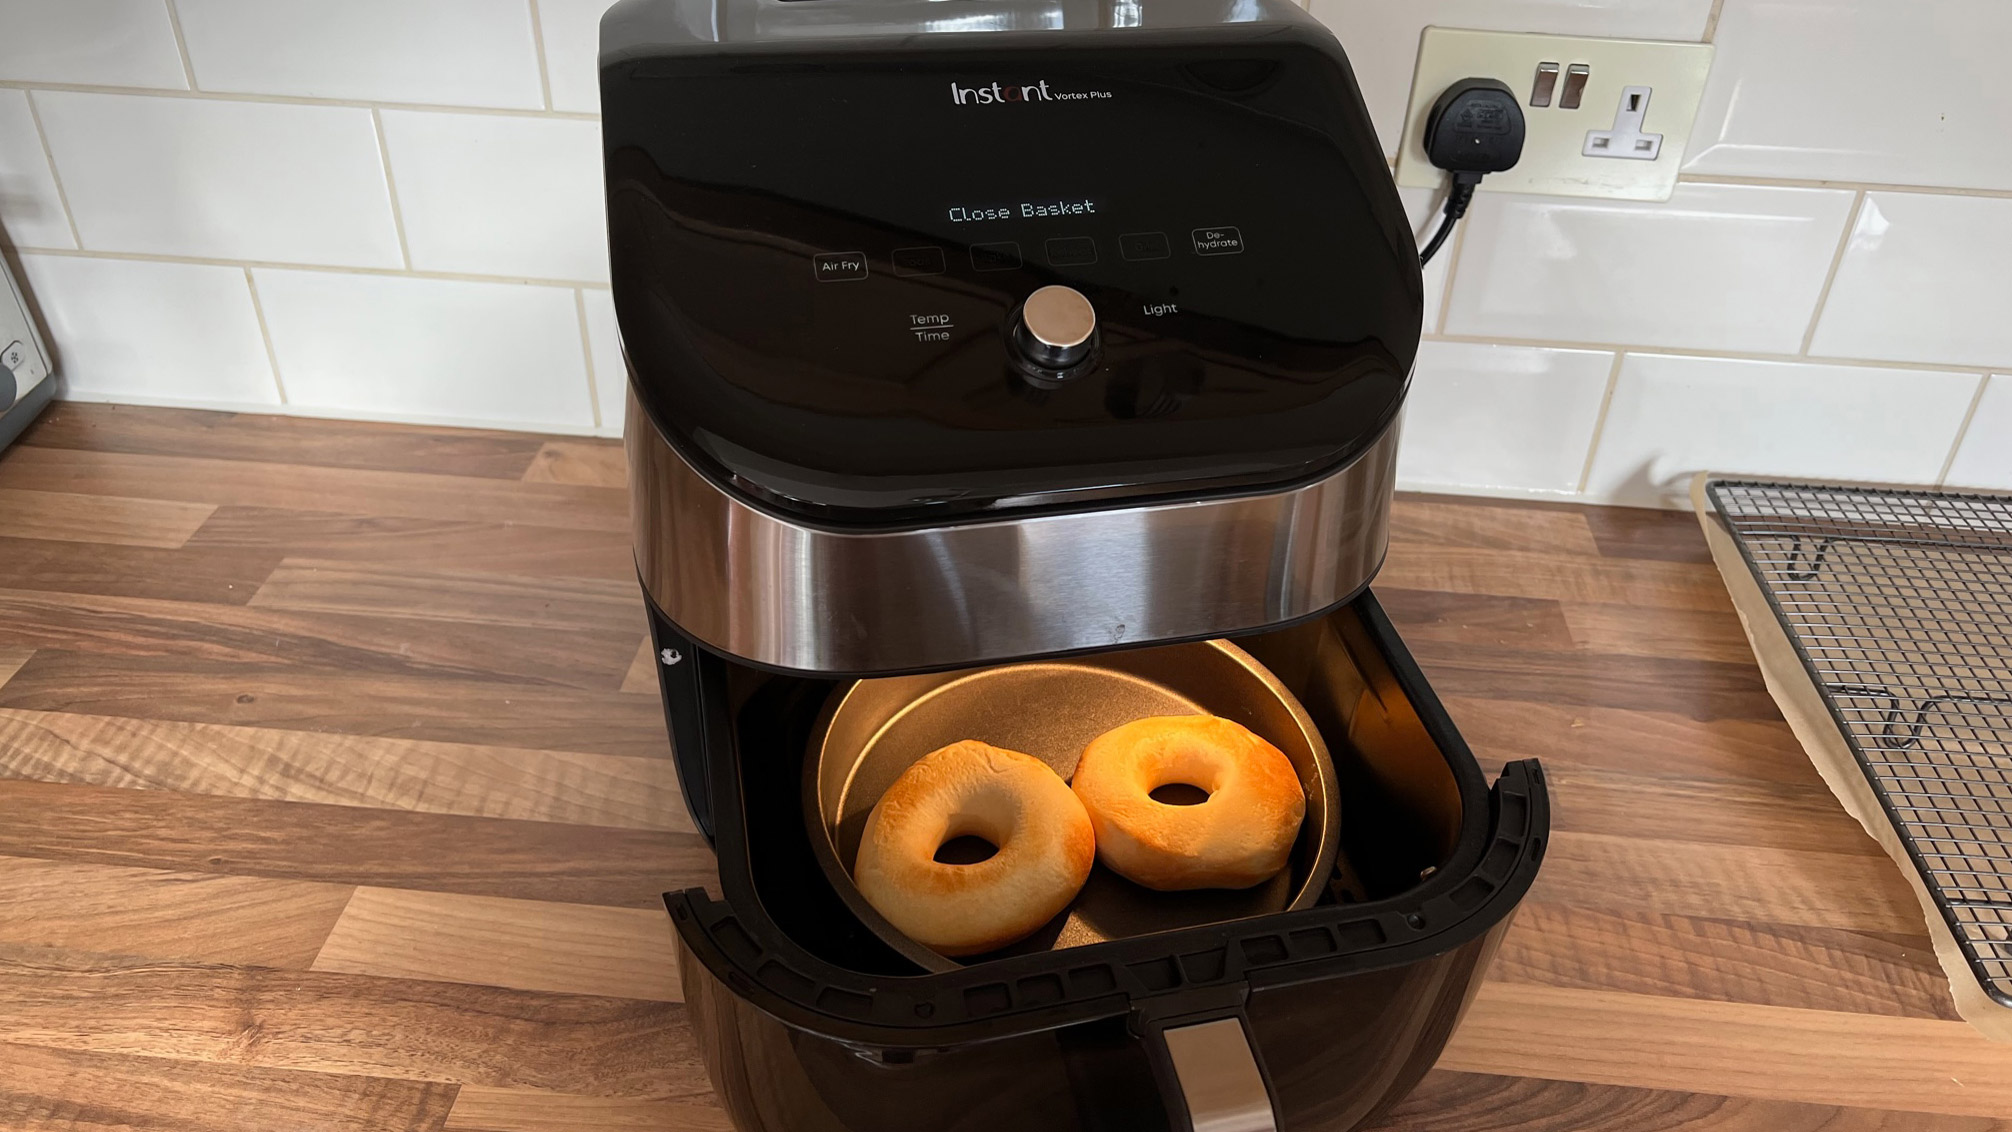 Two donuts in a metal can in the basket of the air fryer, under preparation